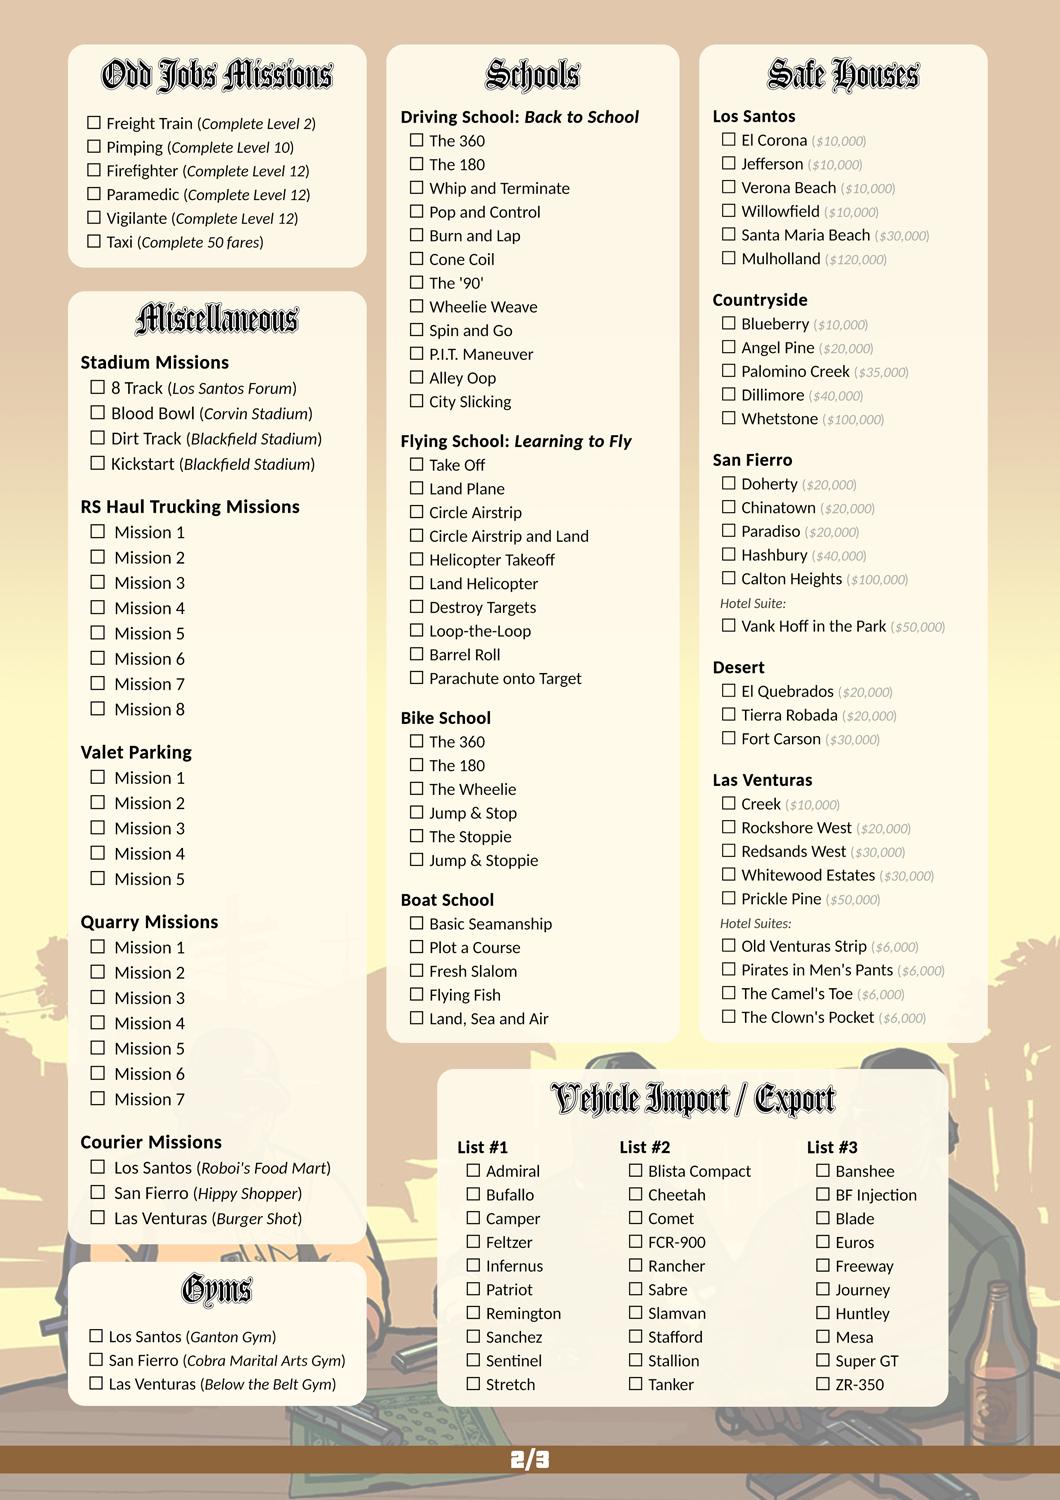 GTA San Andreas 100% Completion Guide & Full Checklist